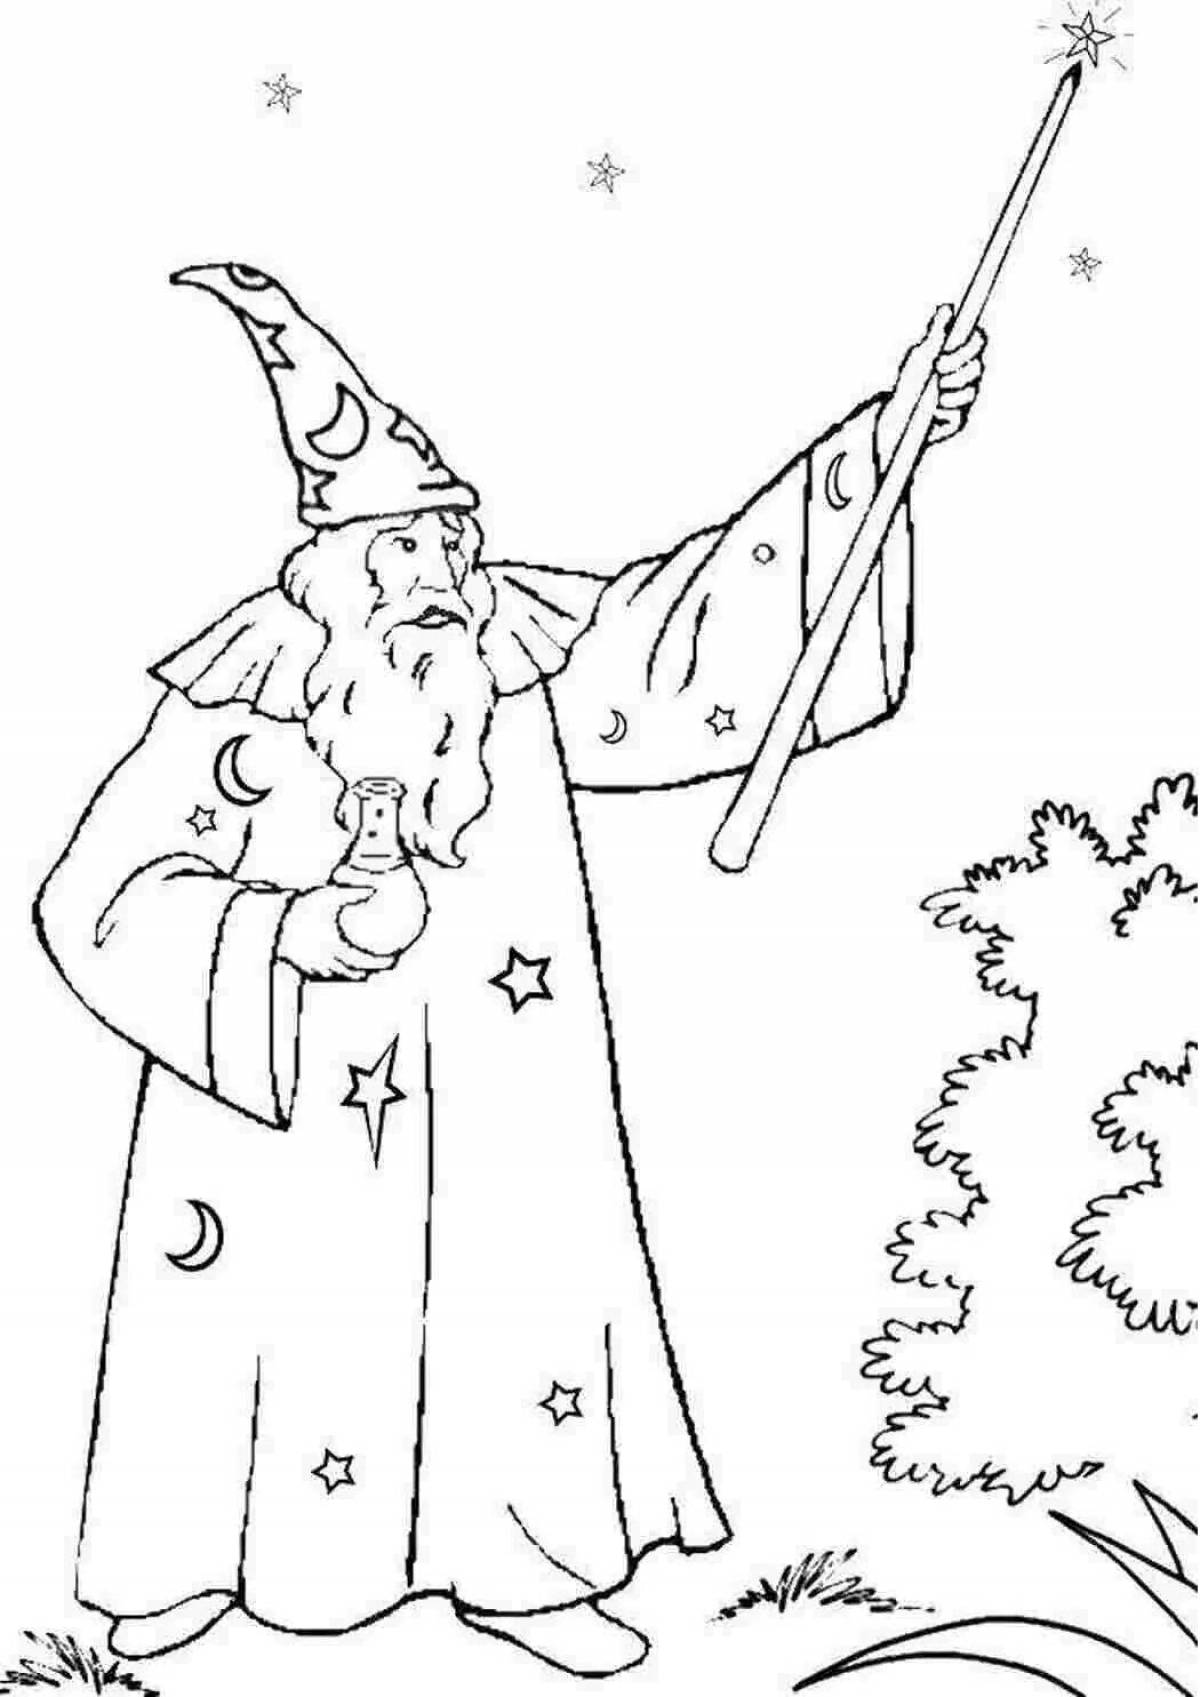 Colorful wizard coloring for kids